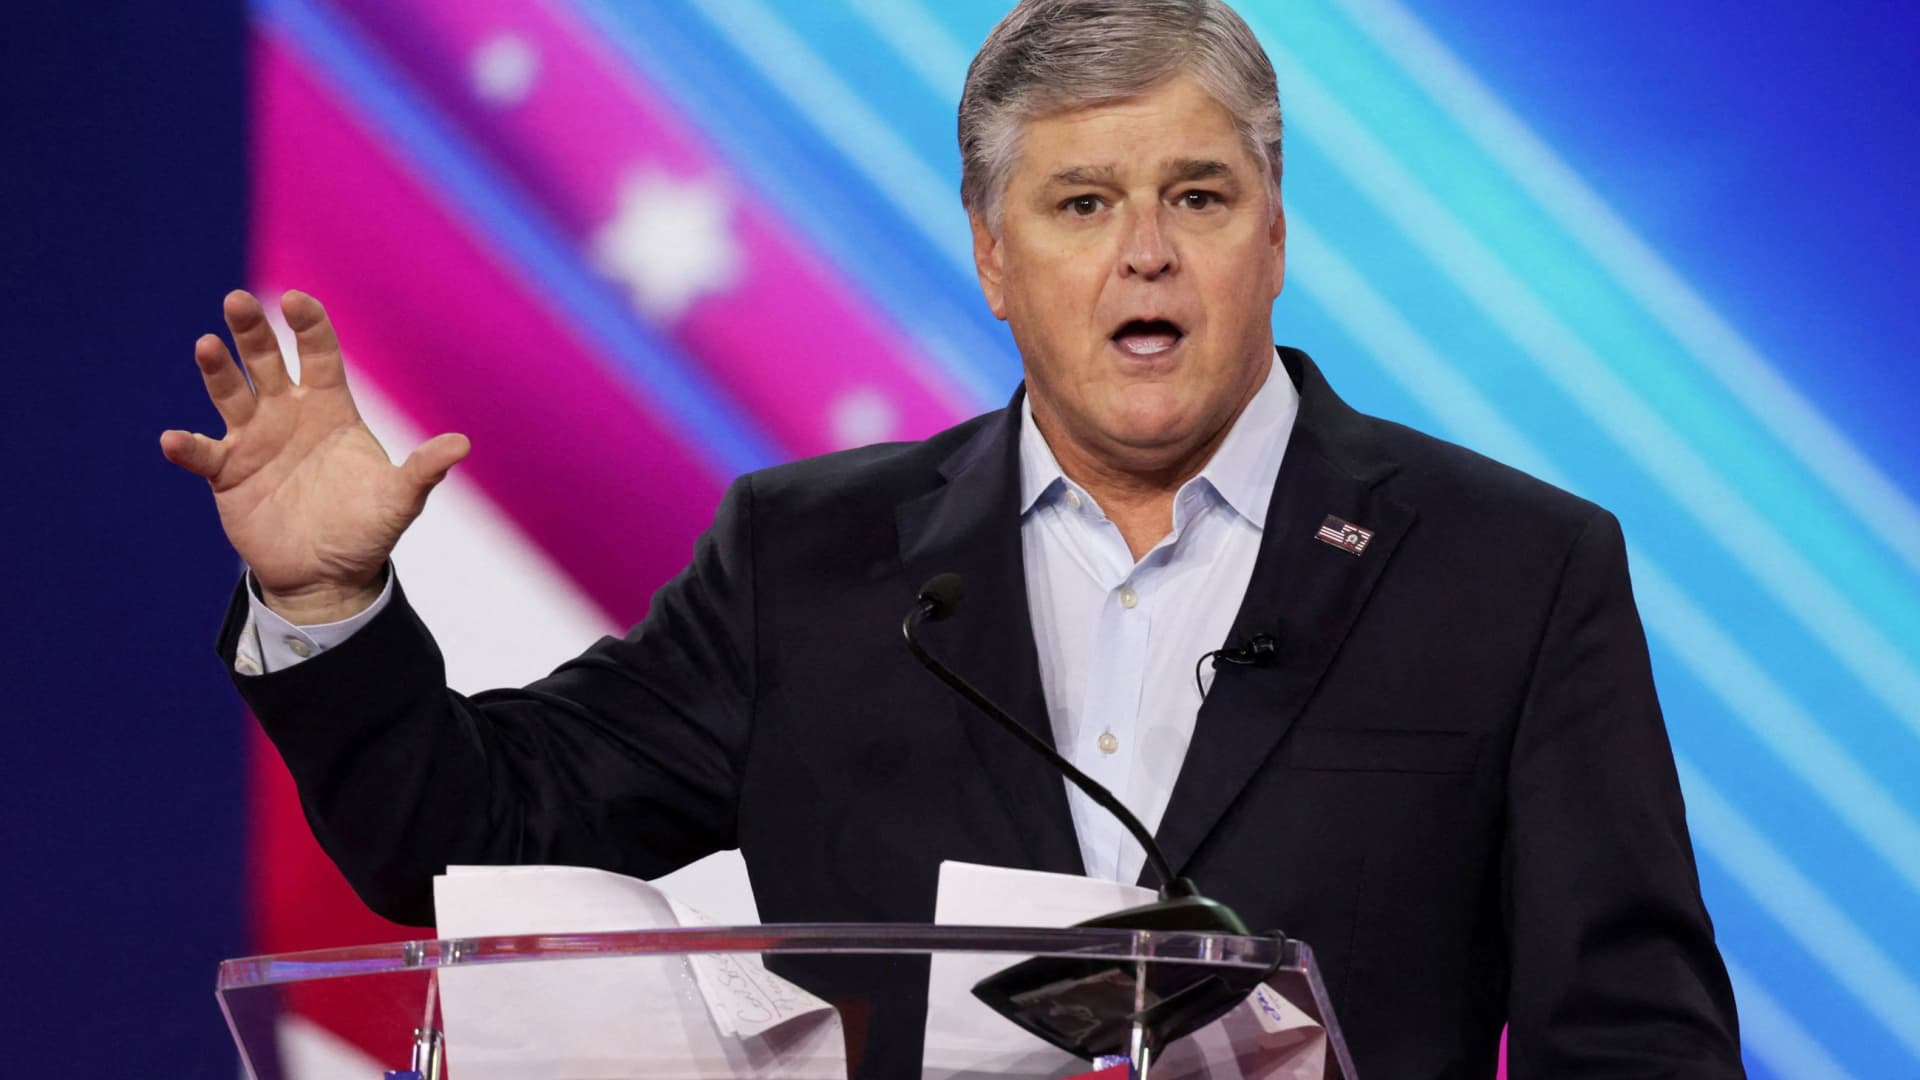 Fox News Channel Host Sean Hannity speaks at the Conservative Political Action Conference (CPAC) in Dallas, Texas, August 4, 2022.